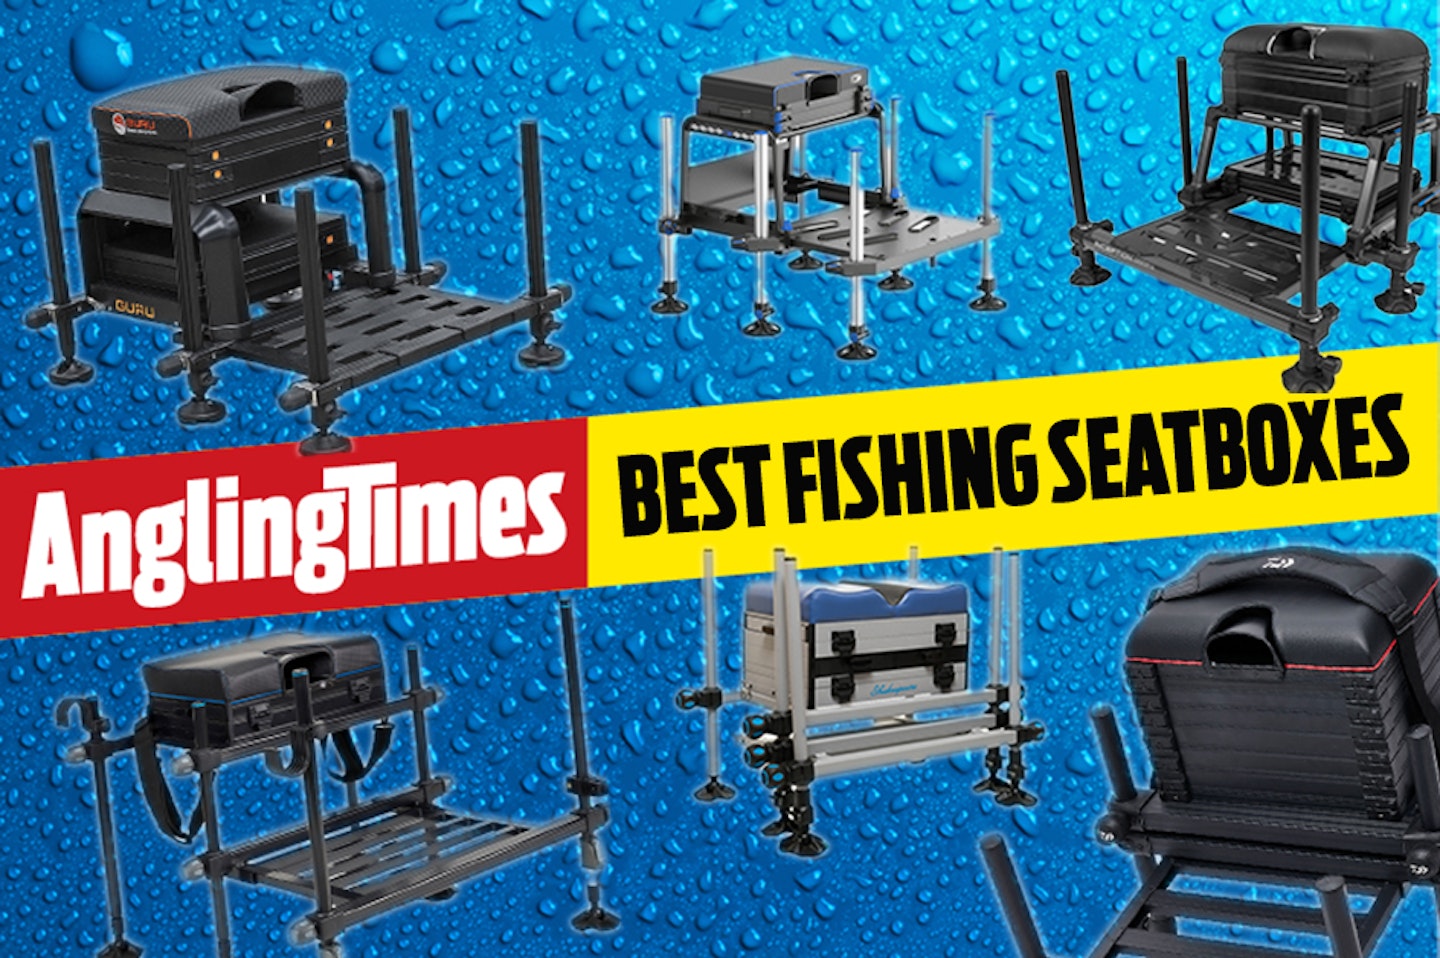 Buyer's Guide to The Best Fishing Seatboxes